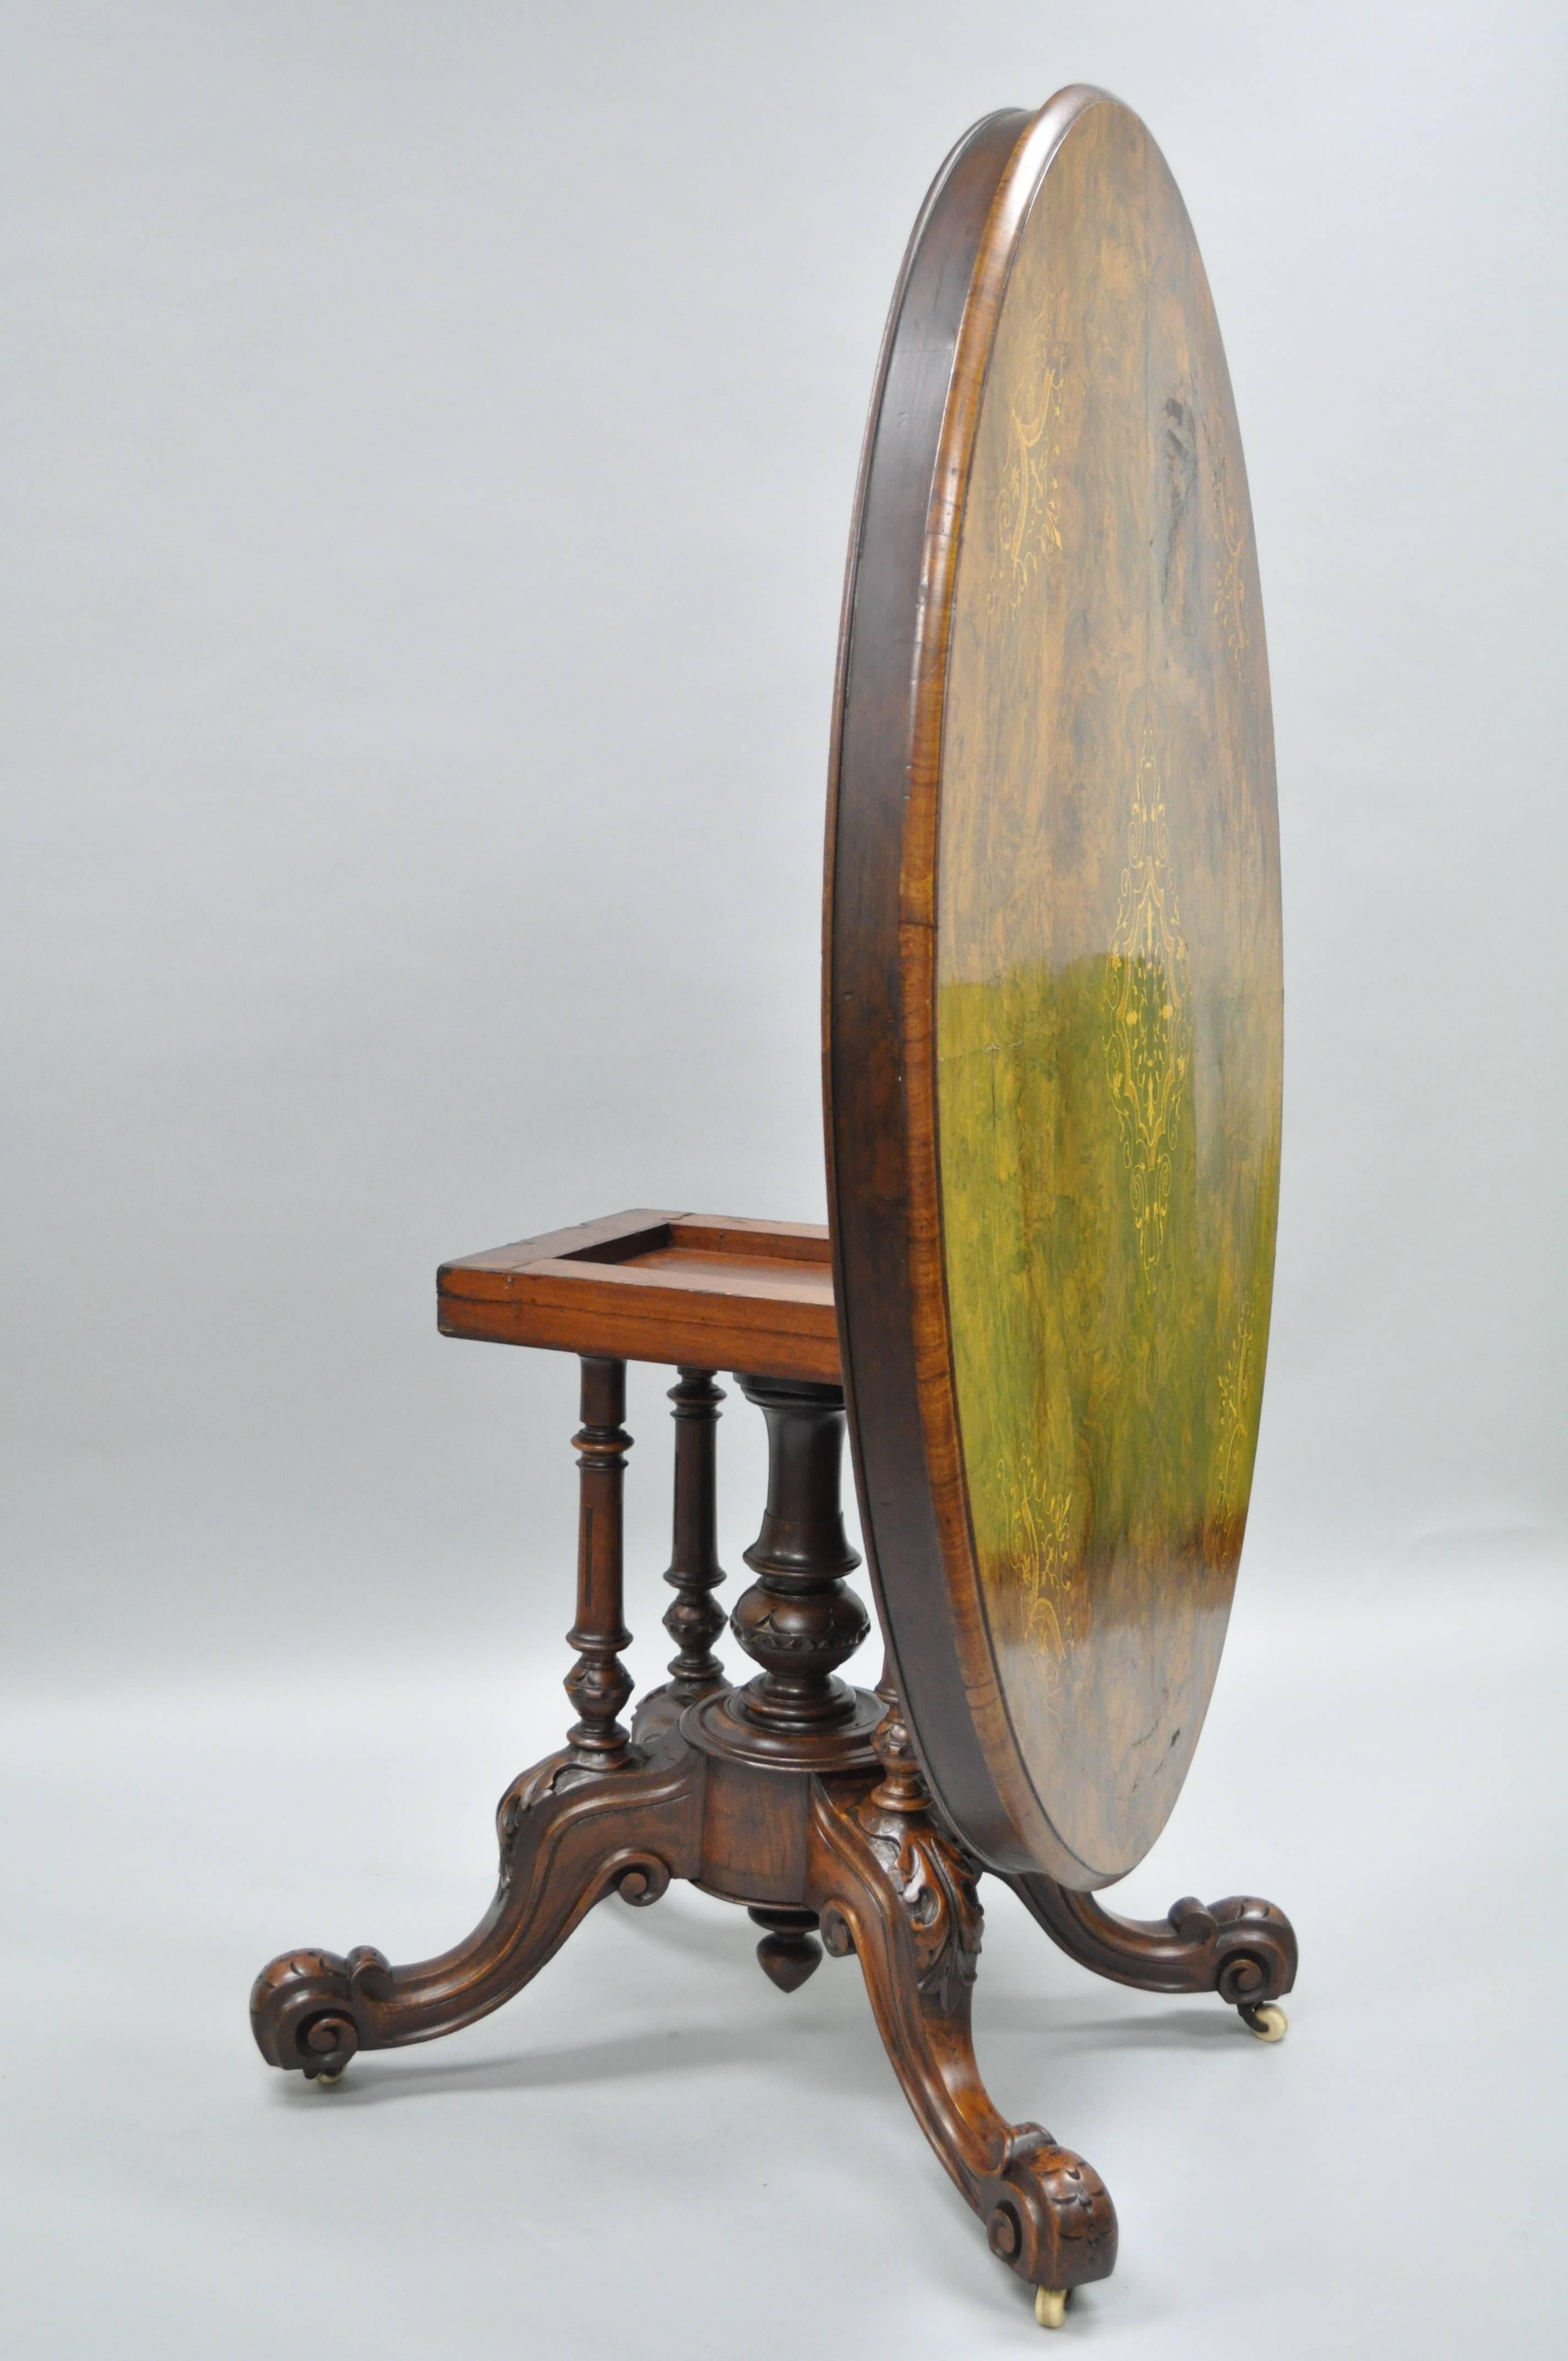 Victorian walnut tilt-top center table, circa late 19th century. The oval burl wood top, inlaid with floral marquetry, rising on four turned supports with a carved central shaft, foliate carved outswept curved legs on scroll feet and casters. 62